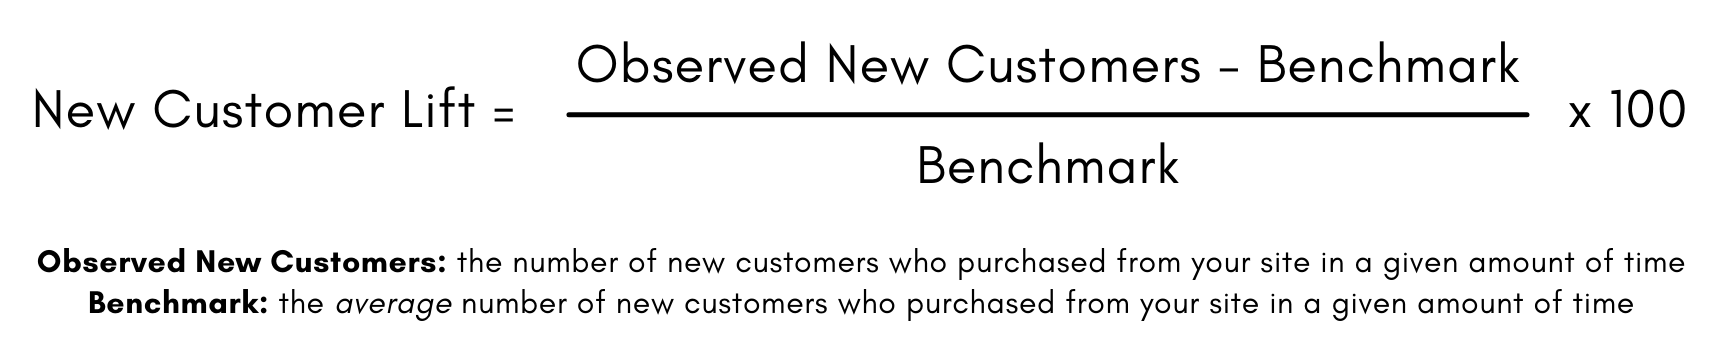 Formula for New Customer Lift: Number of New Customers minus the benchmark, divided by the benchmark, times 100.